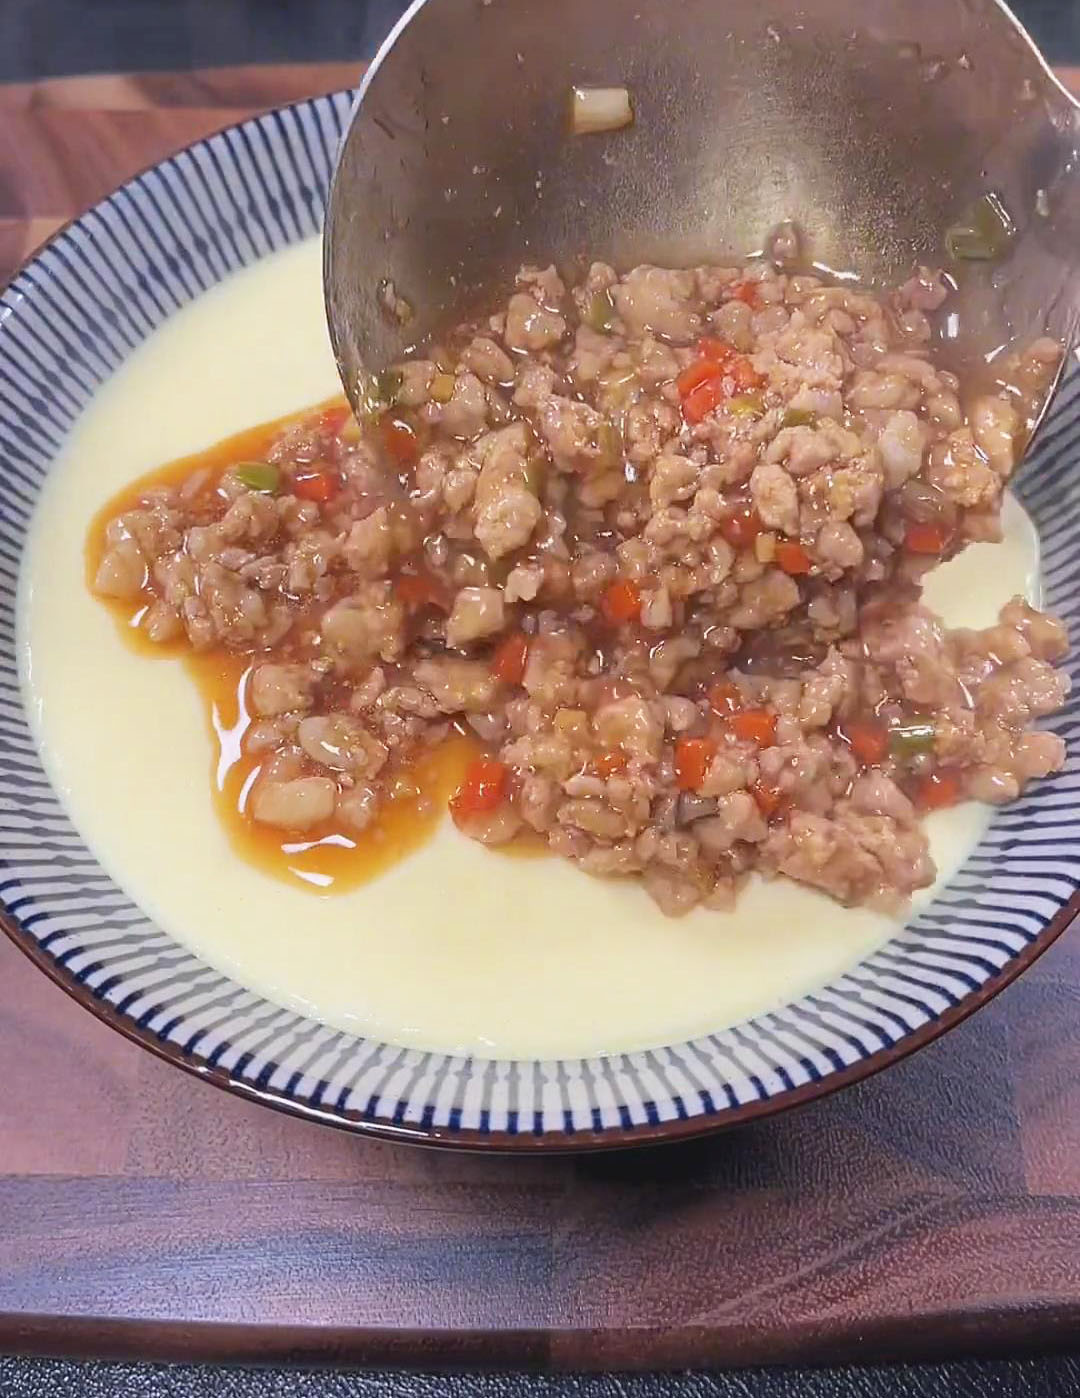 Pour the cooked minced pork mixture over the steamed tofu and eggs